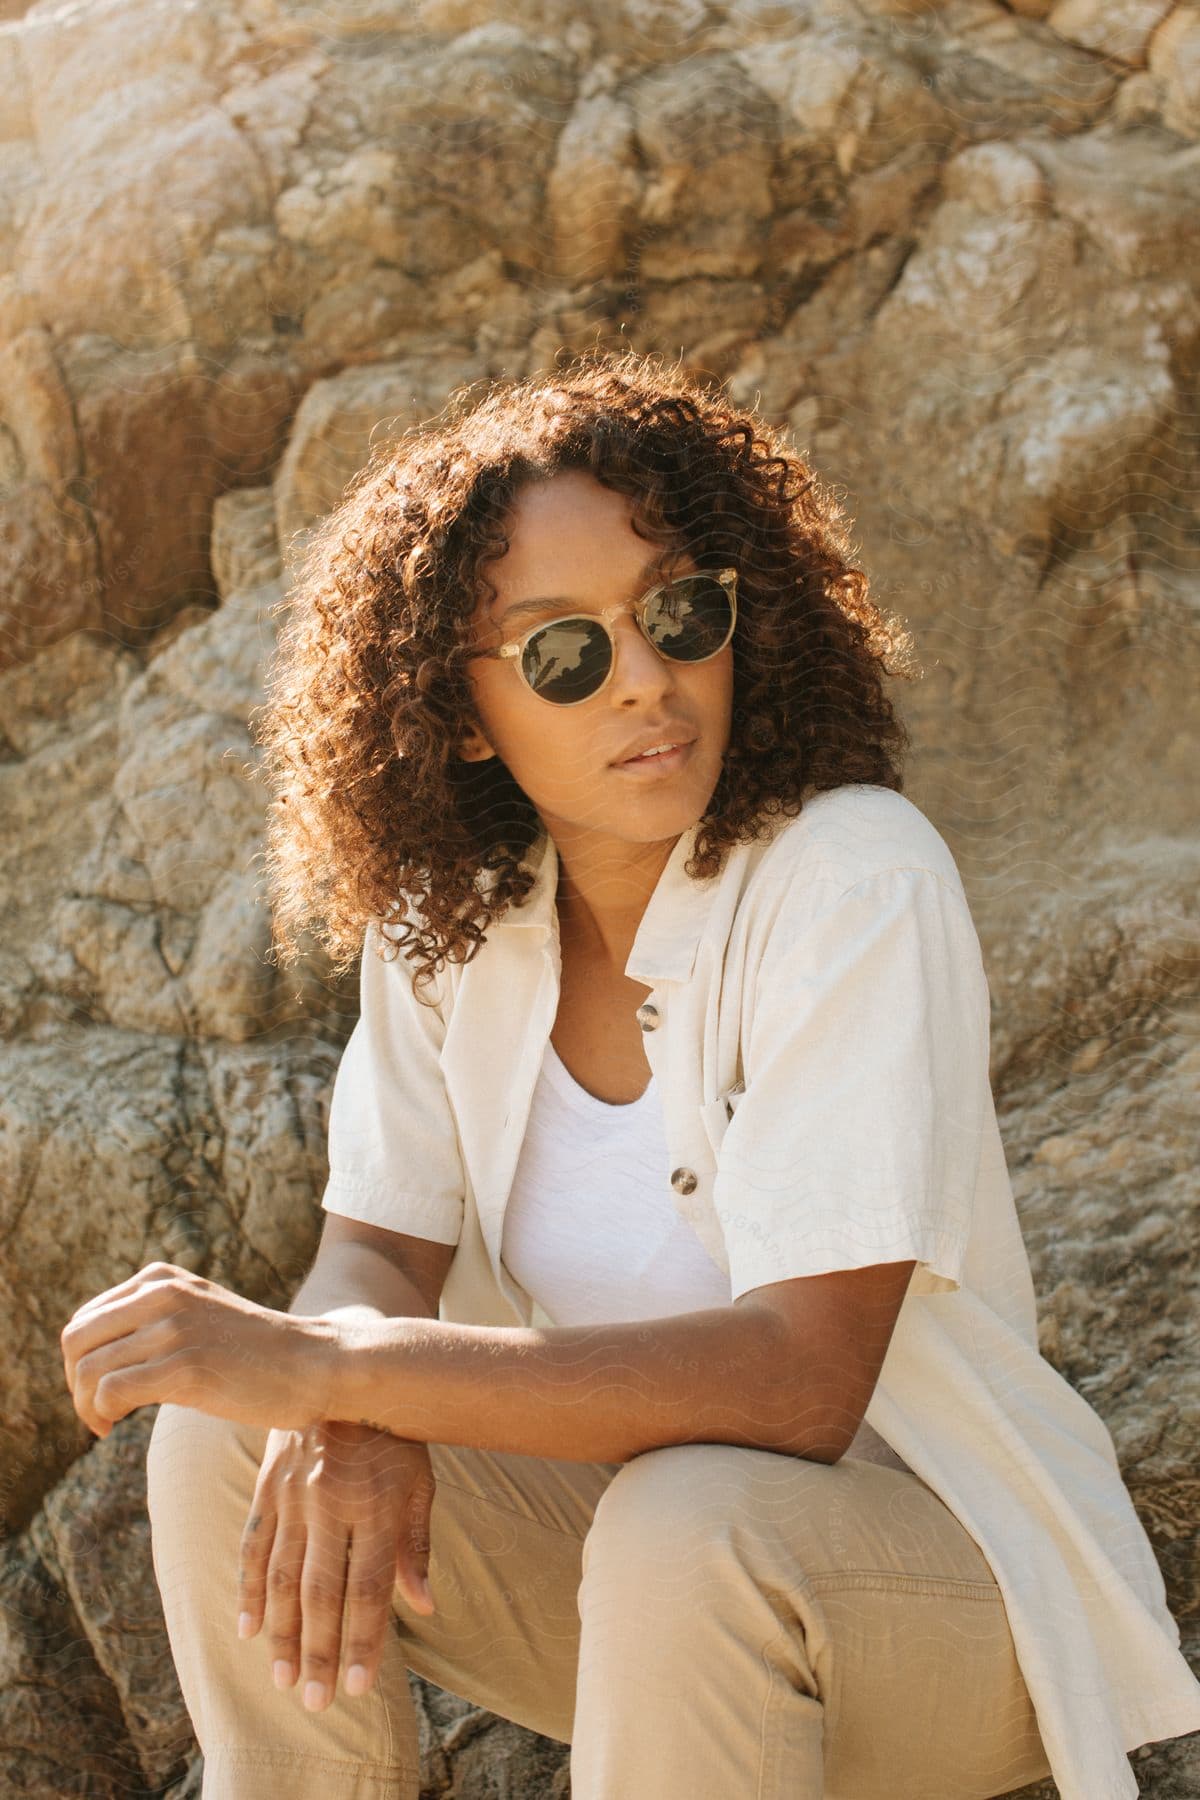 A person with curly hair and sunglasses smiling